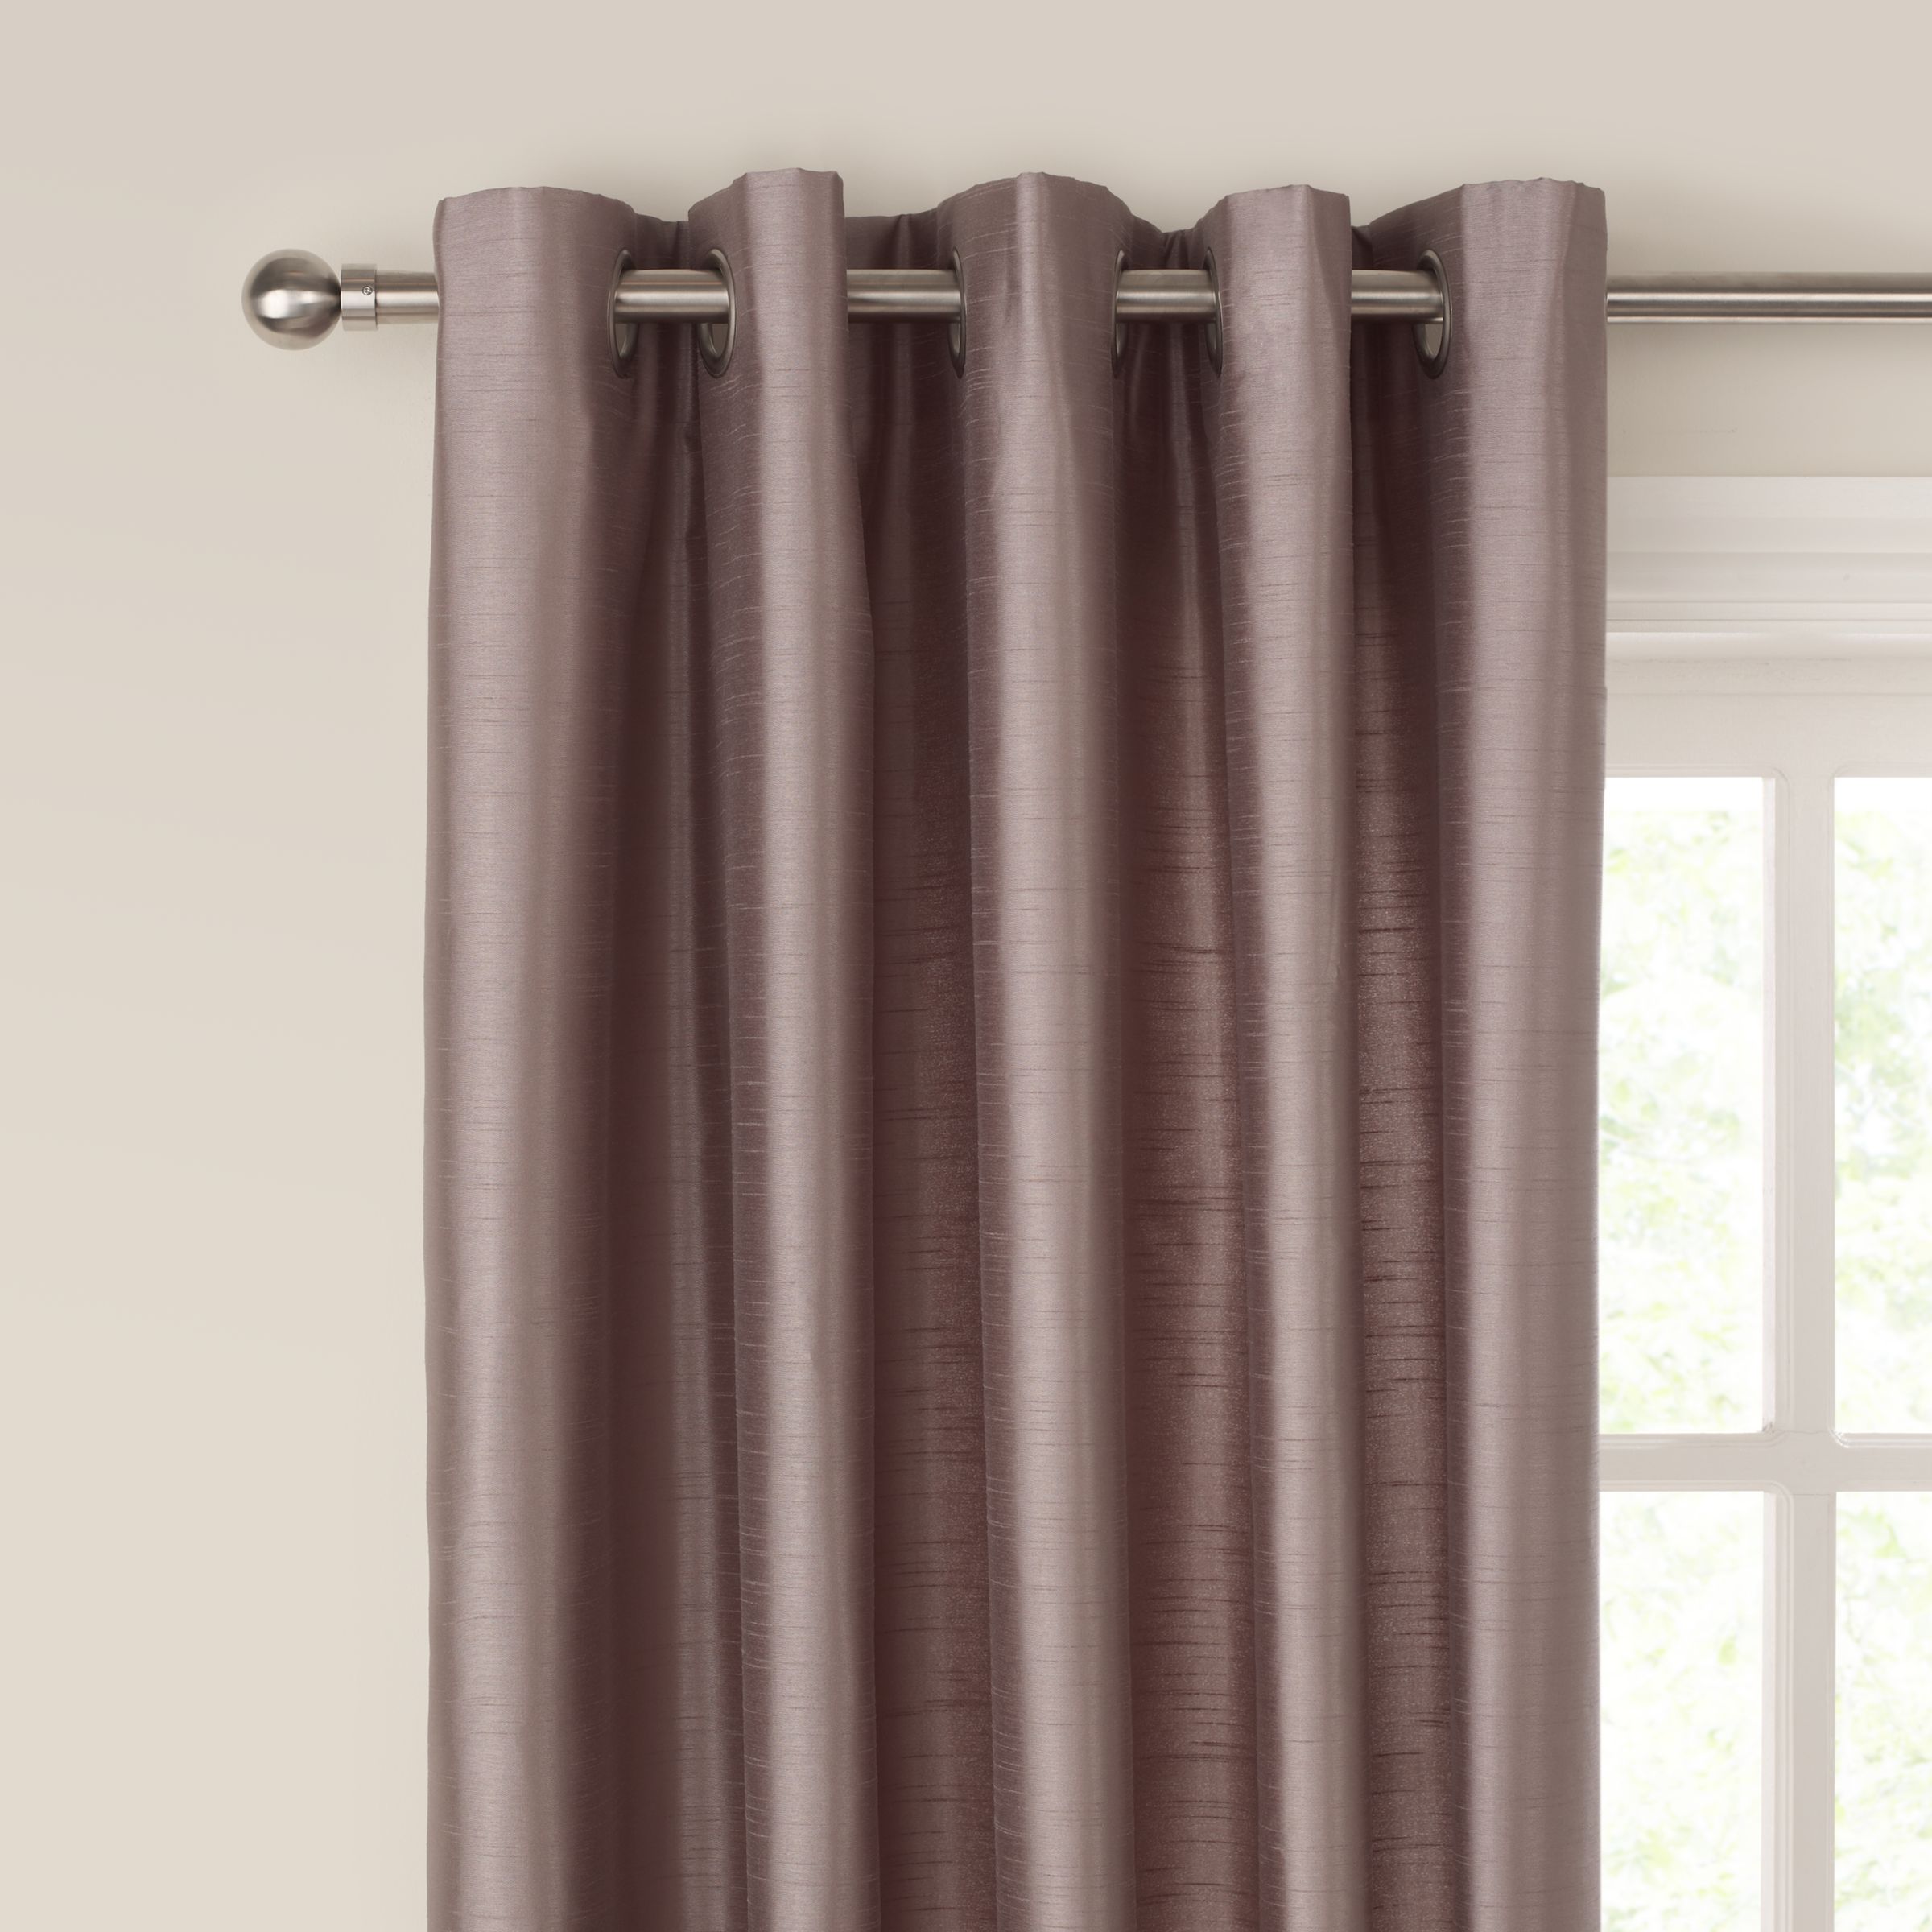 Grace Lined Eyelet Curtains, Pale